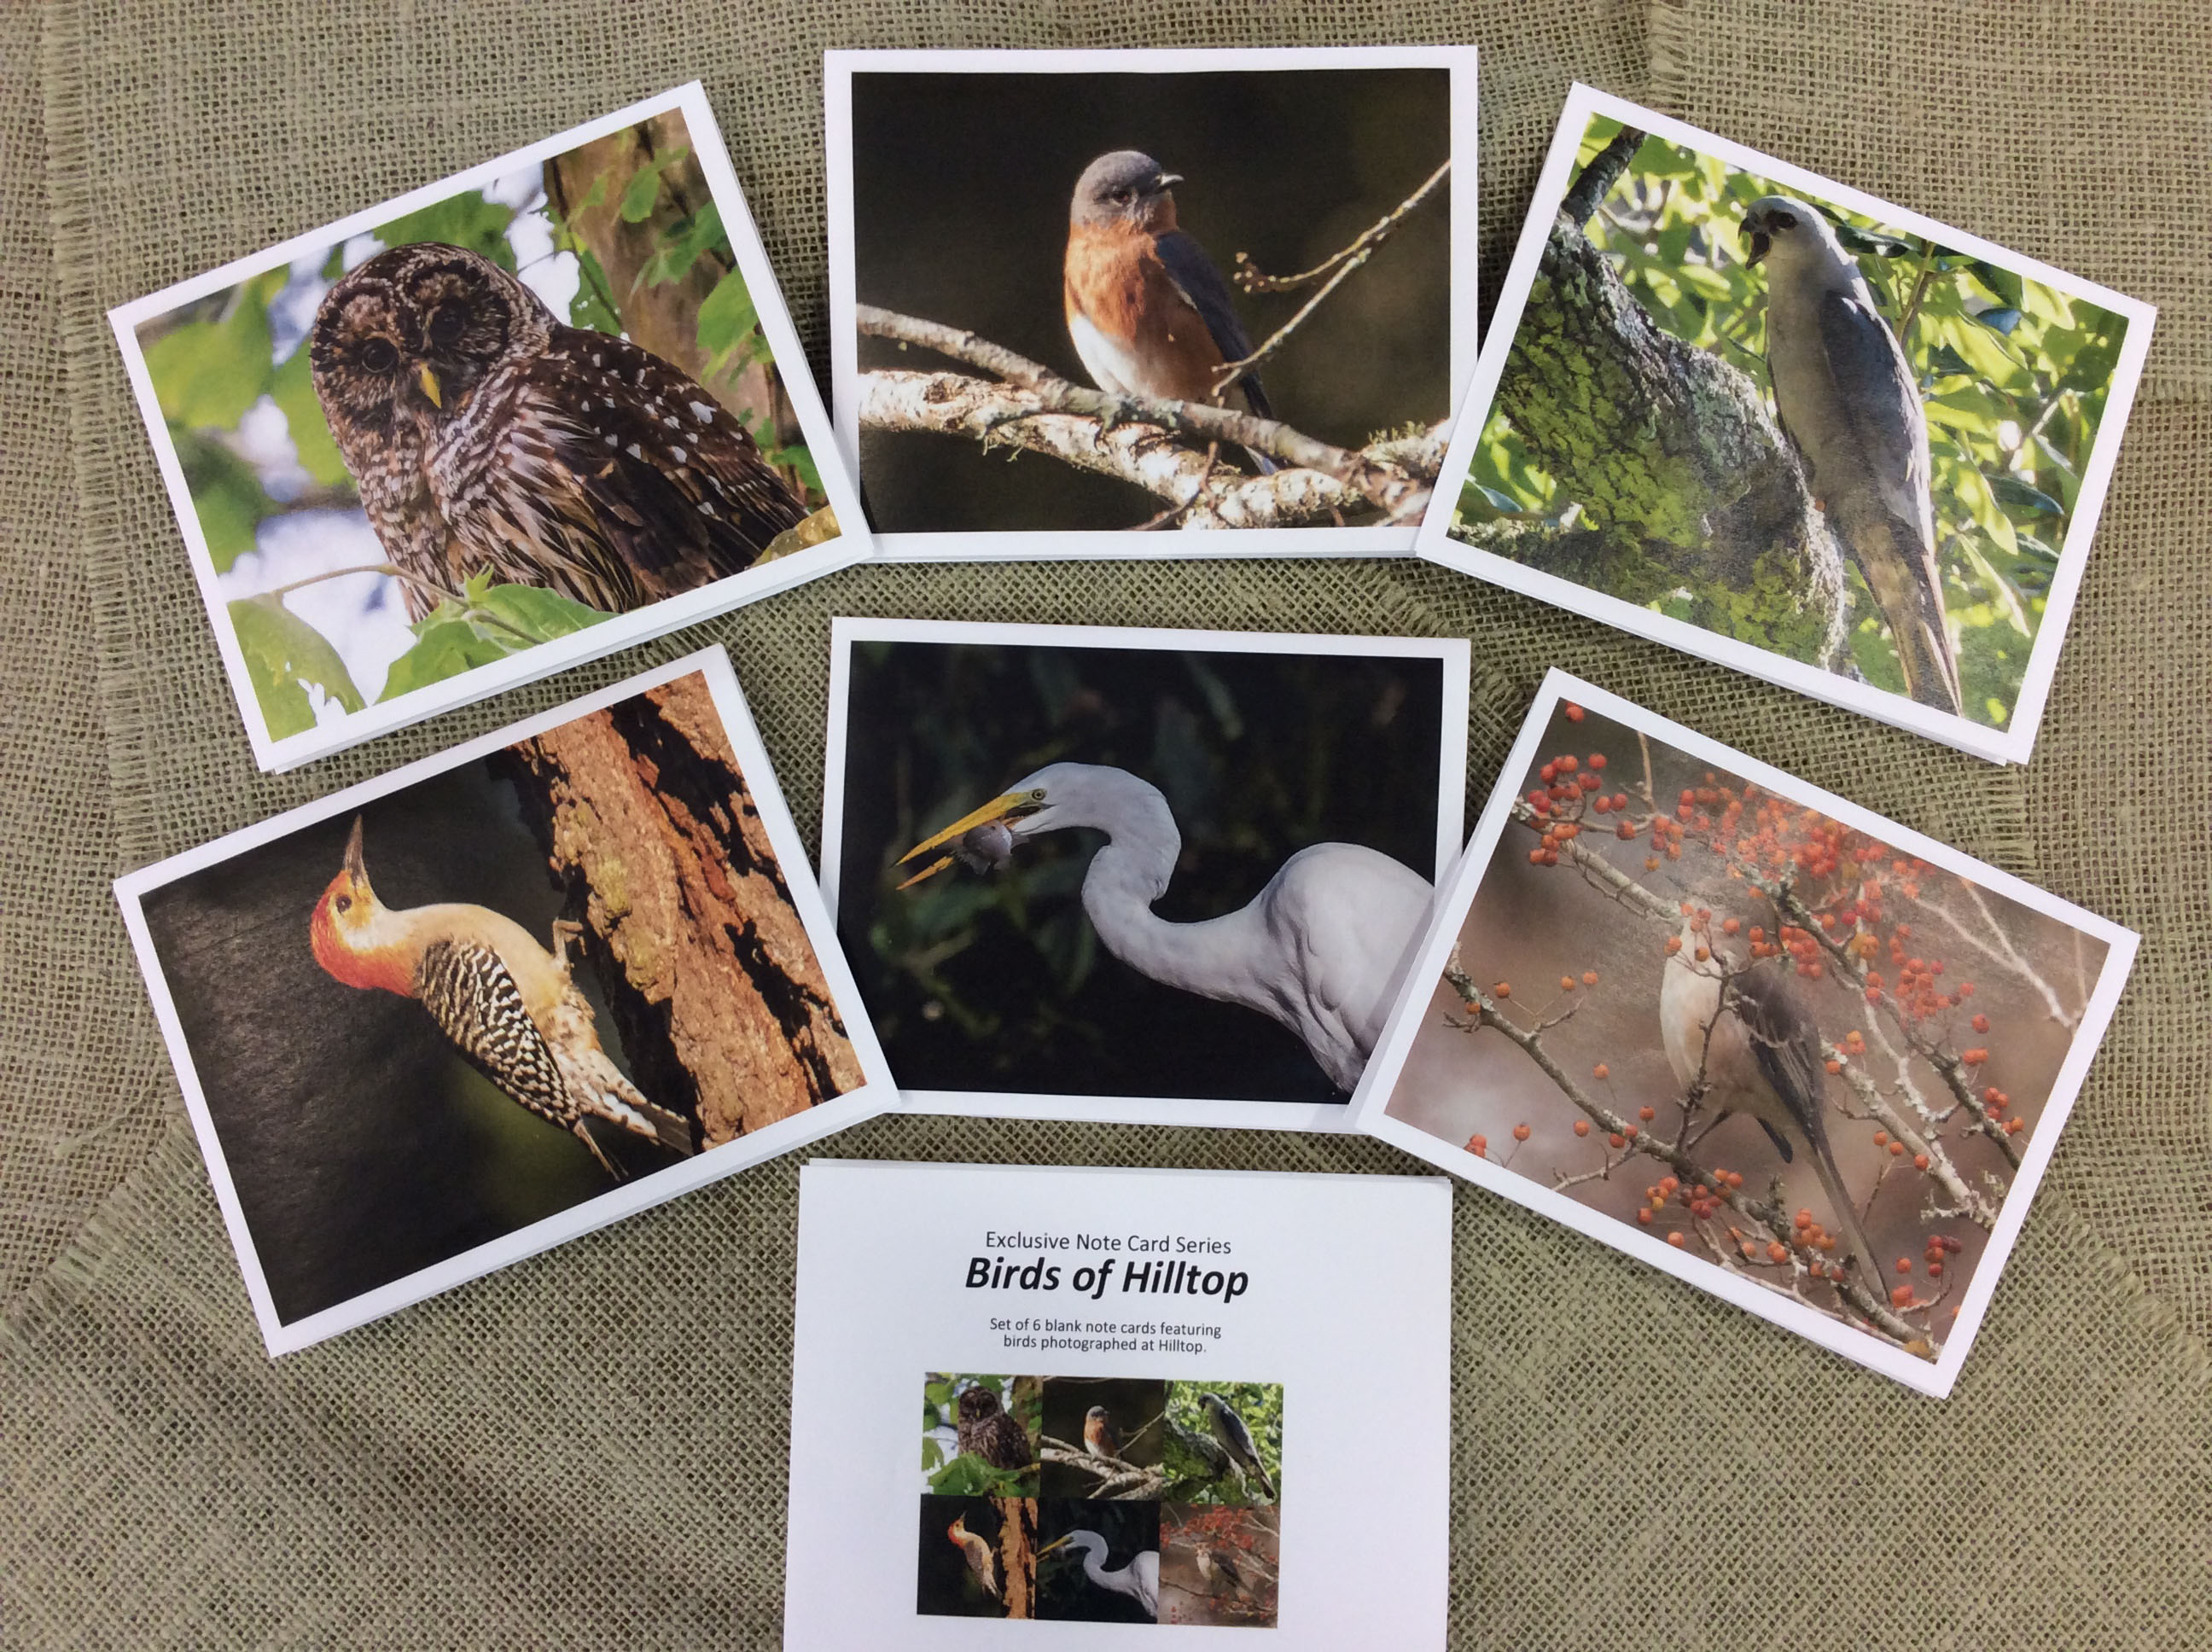 display of Birds of Hilltop note cards